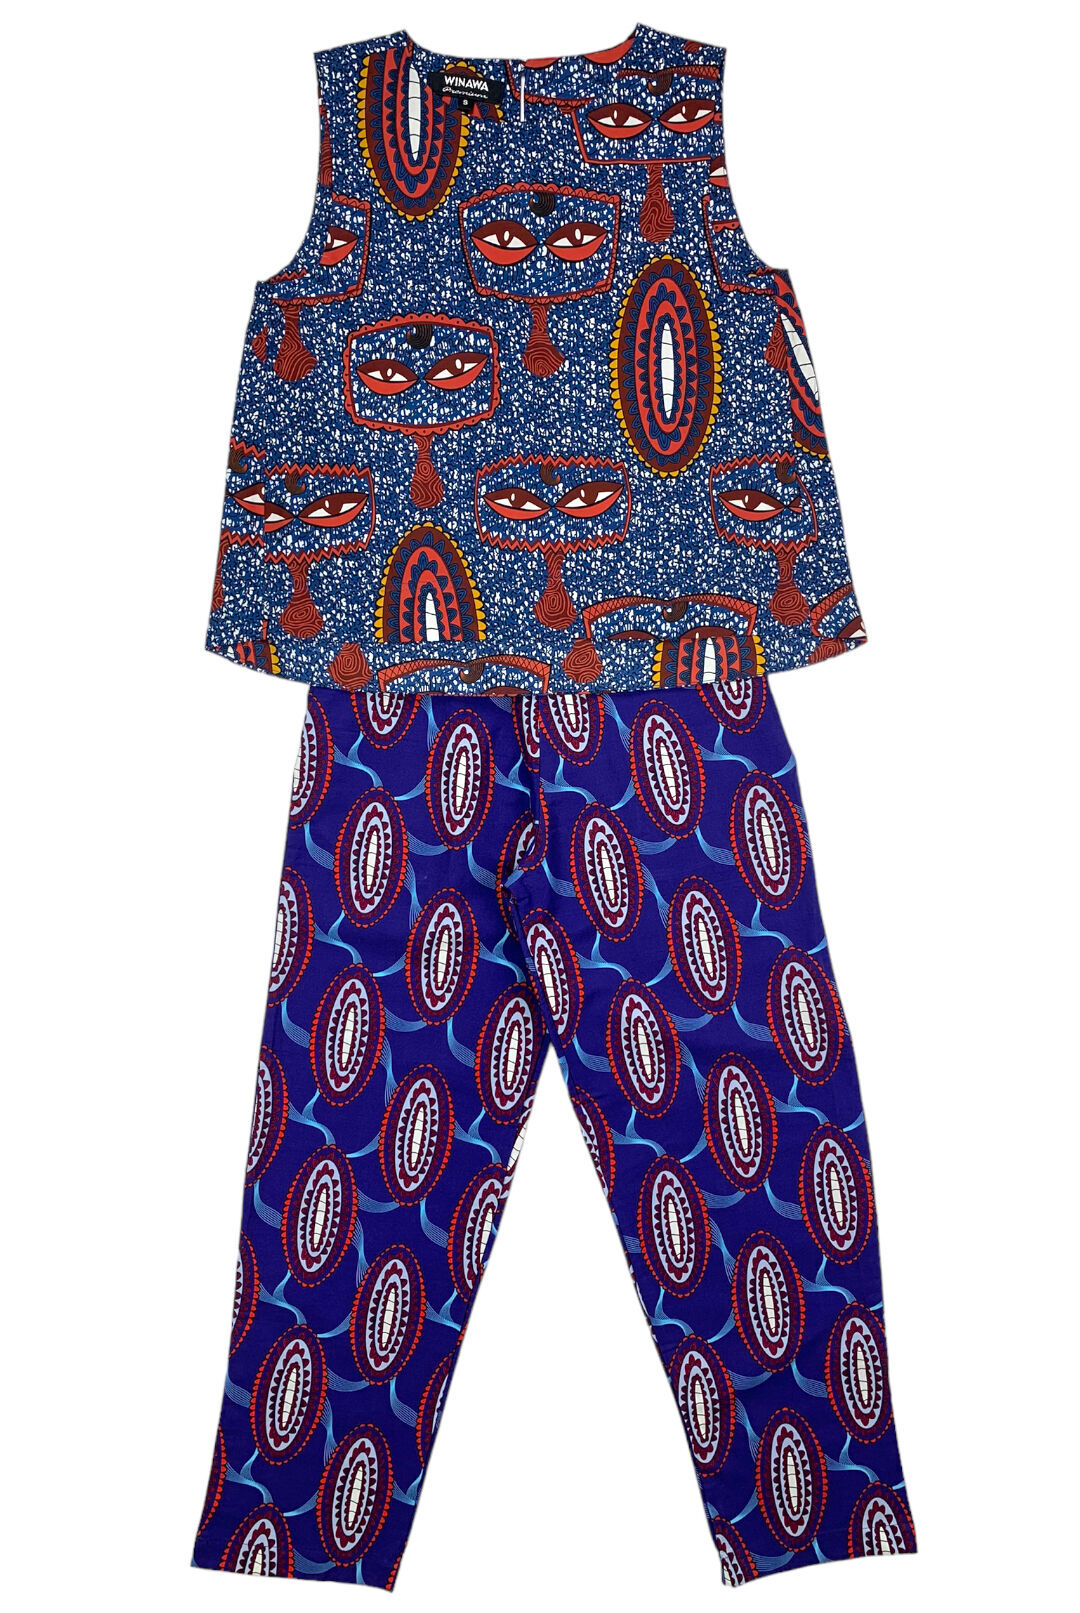 AFRICAN SLEEVELESS TOPS AND PANTS